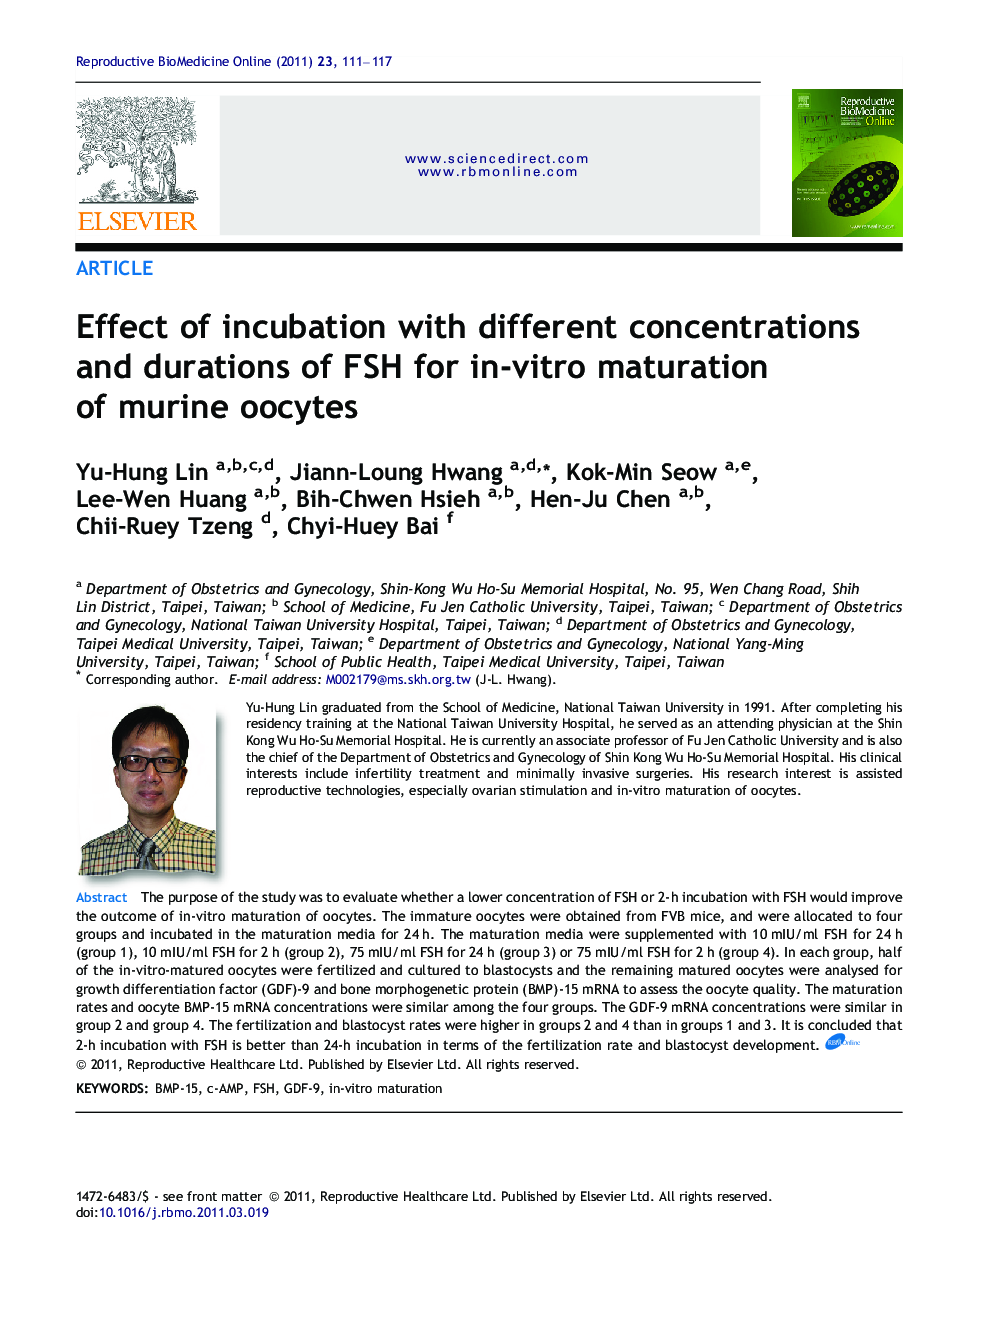 Effect of incubation with different concentrations and durations of FSH for in-vitro maturation of murine oocytes 